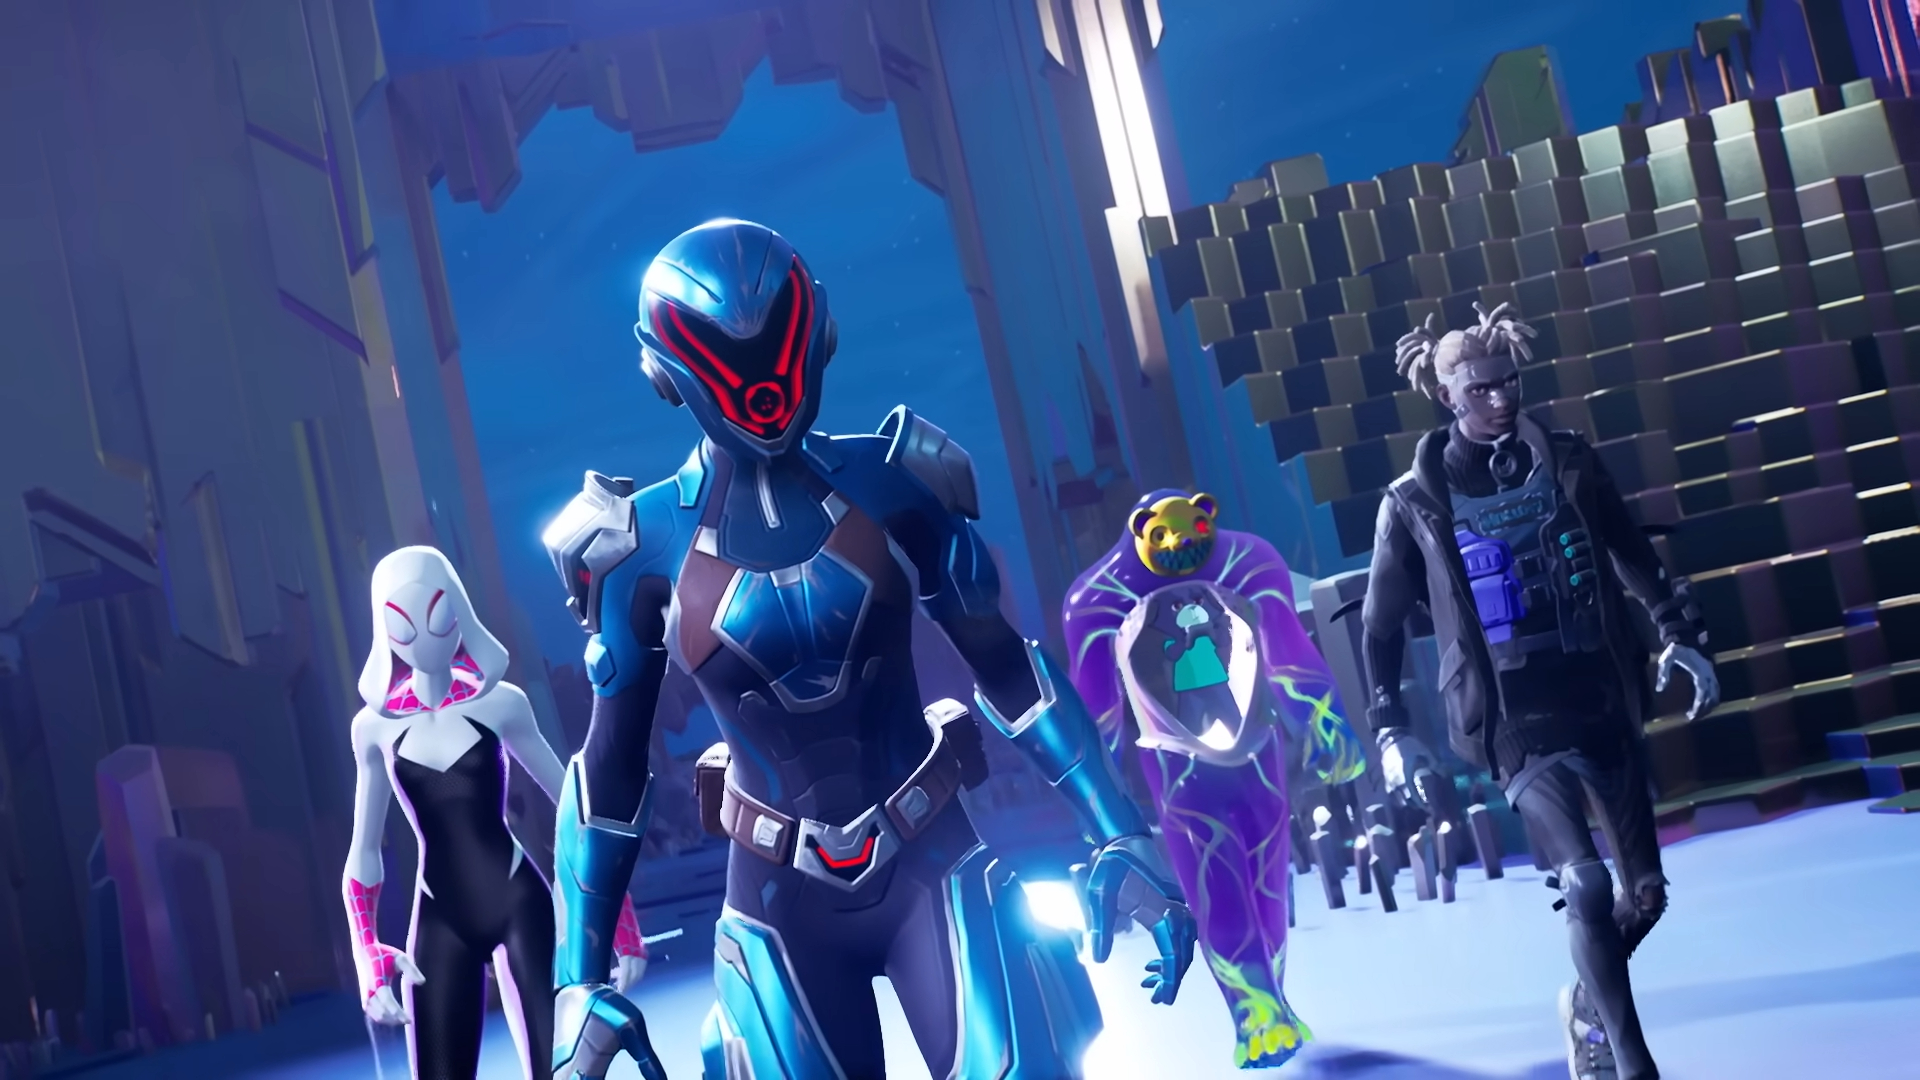 Fortnite is back on the iPhone. Here's how you can play it right